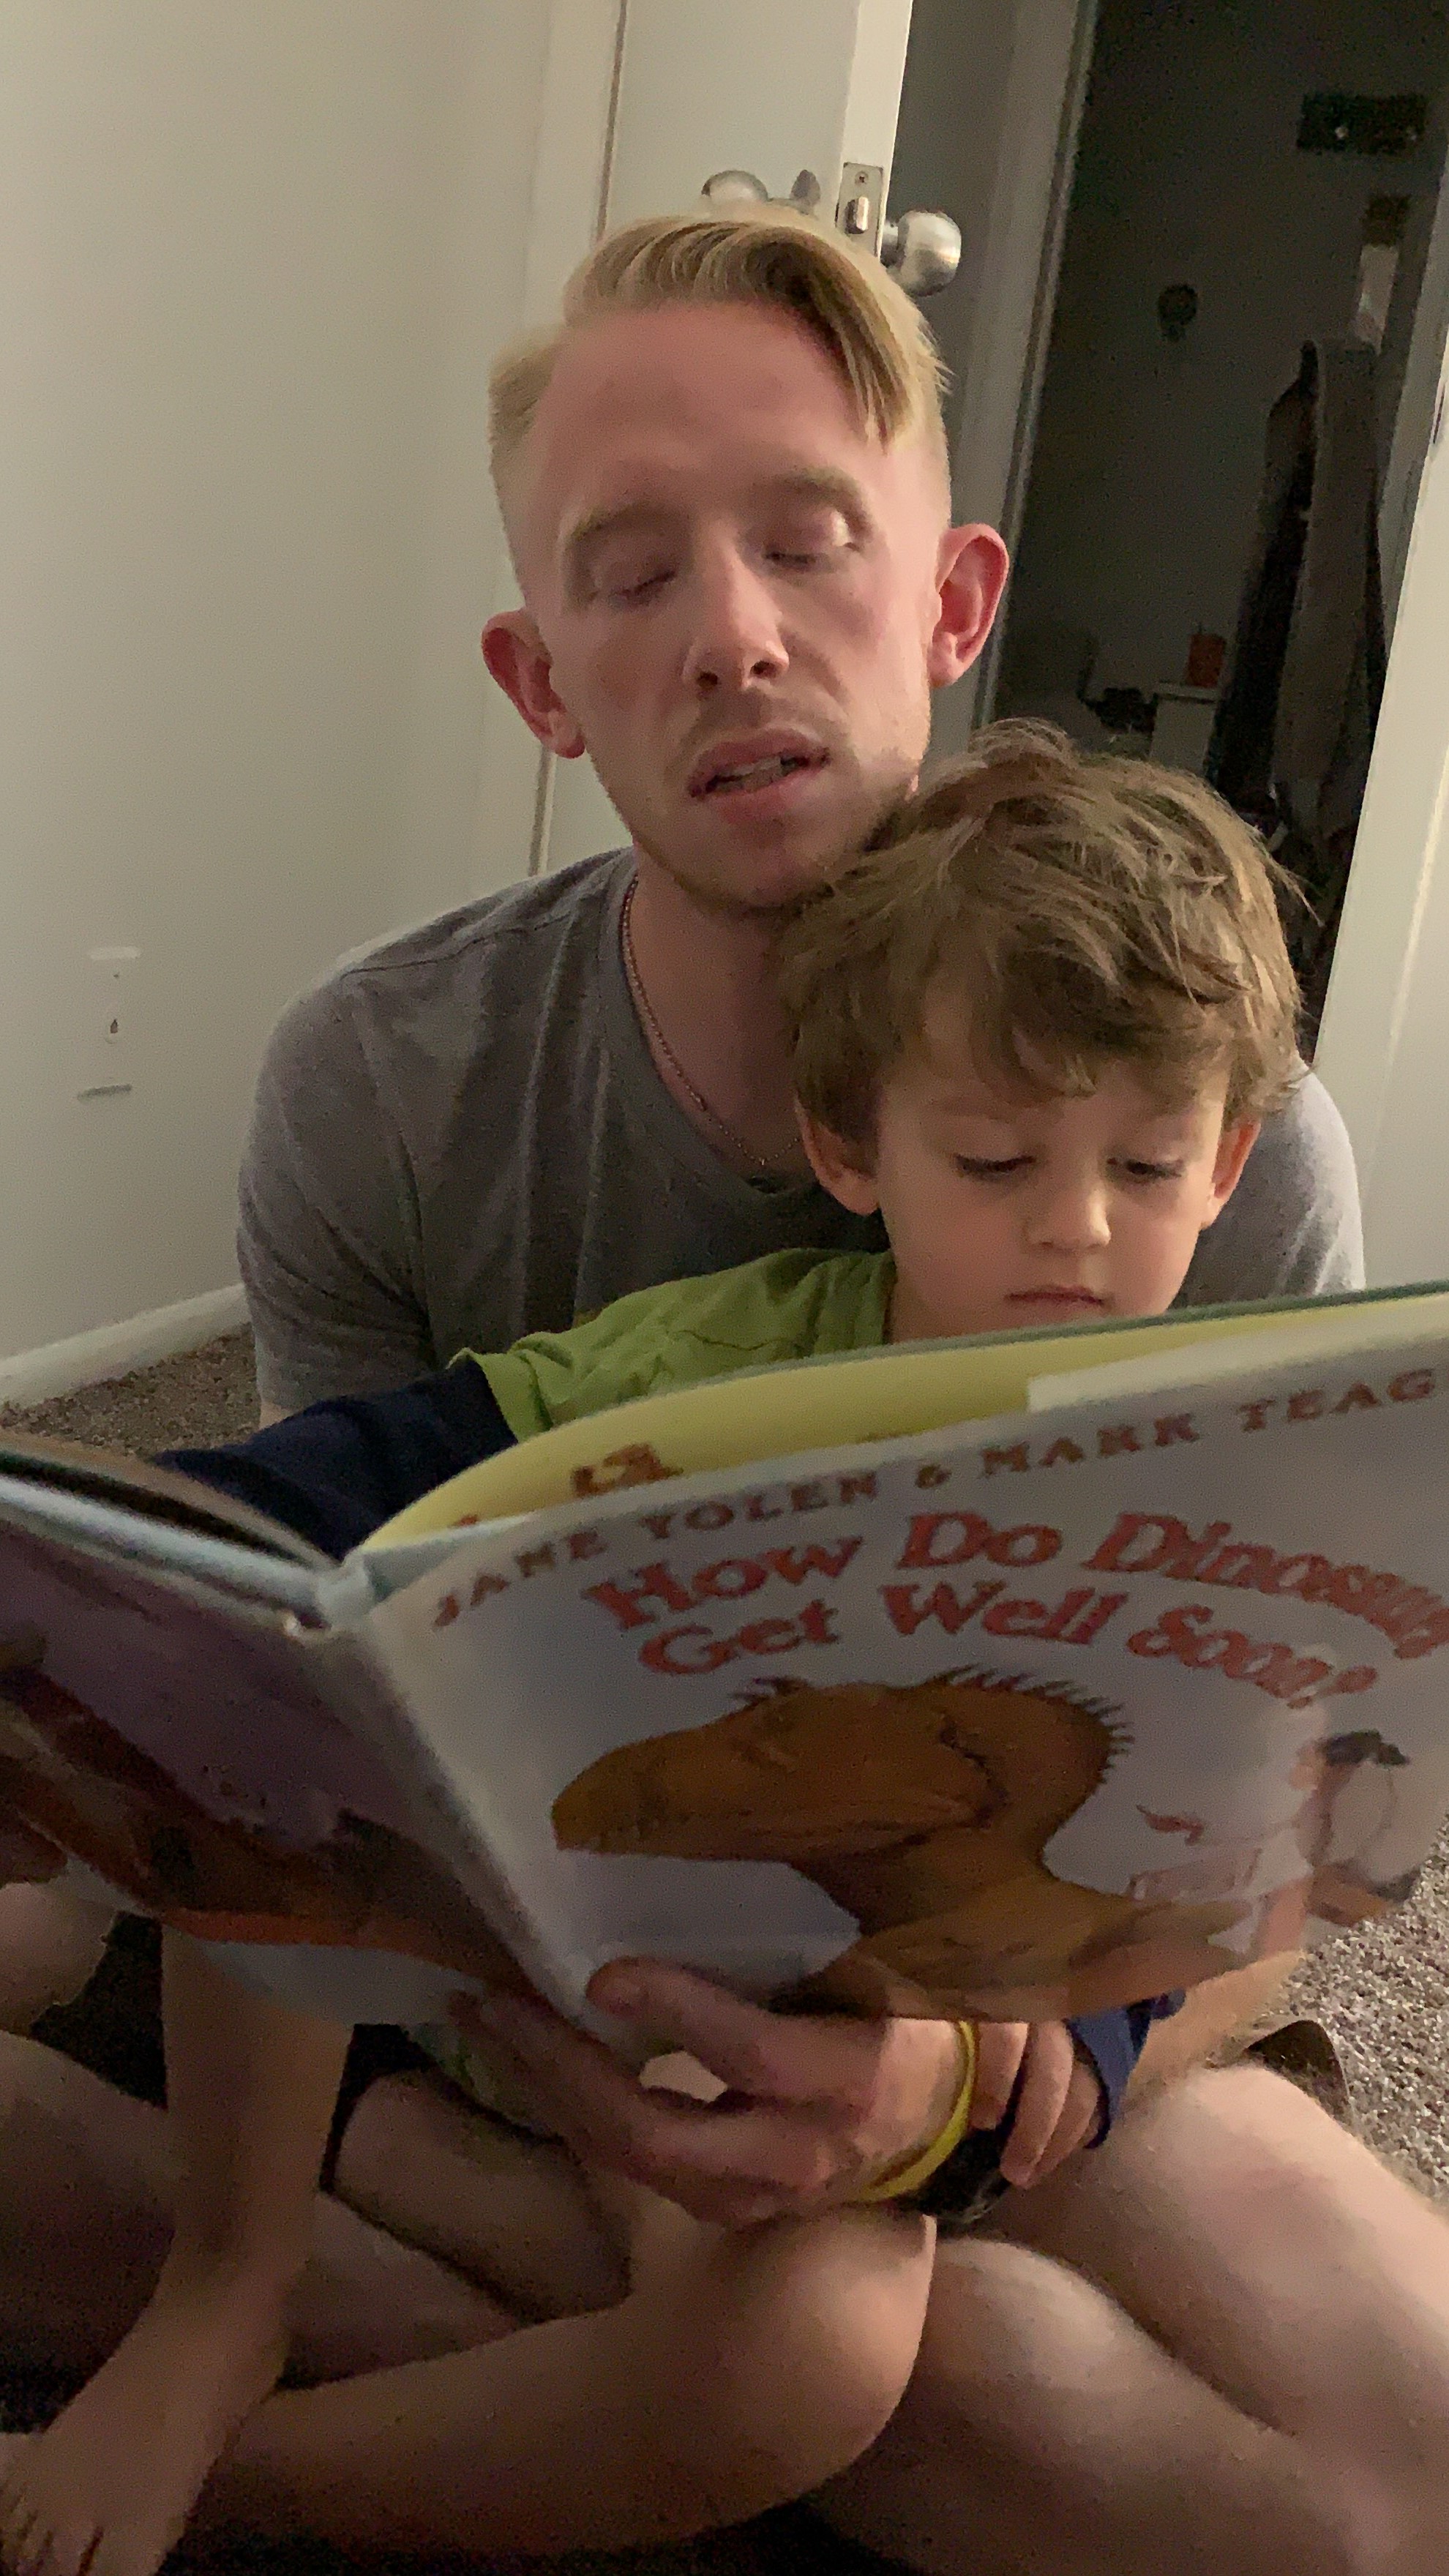 man reading book with child on lap